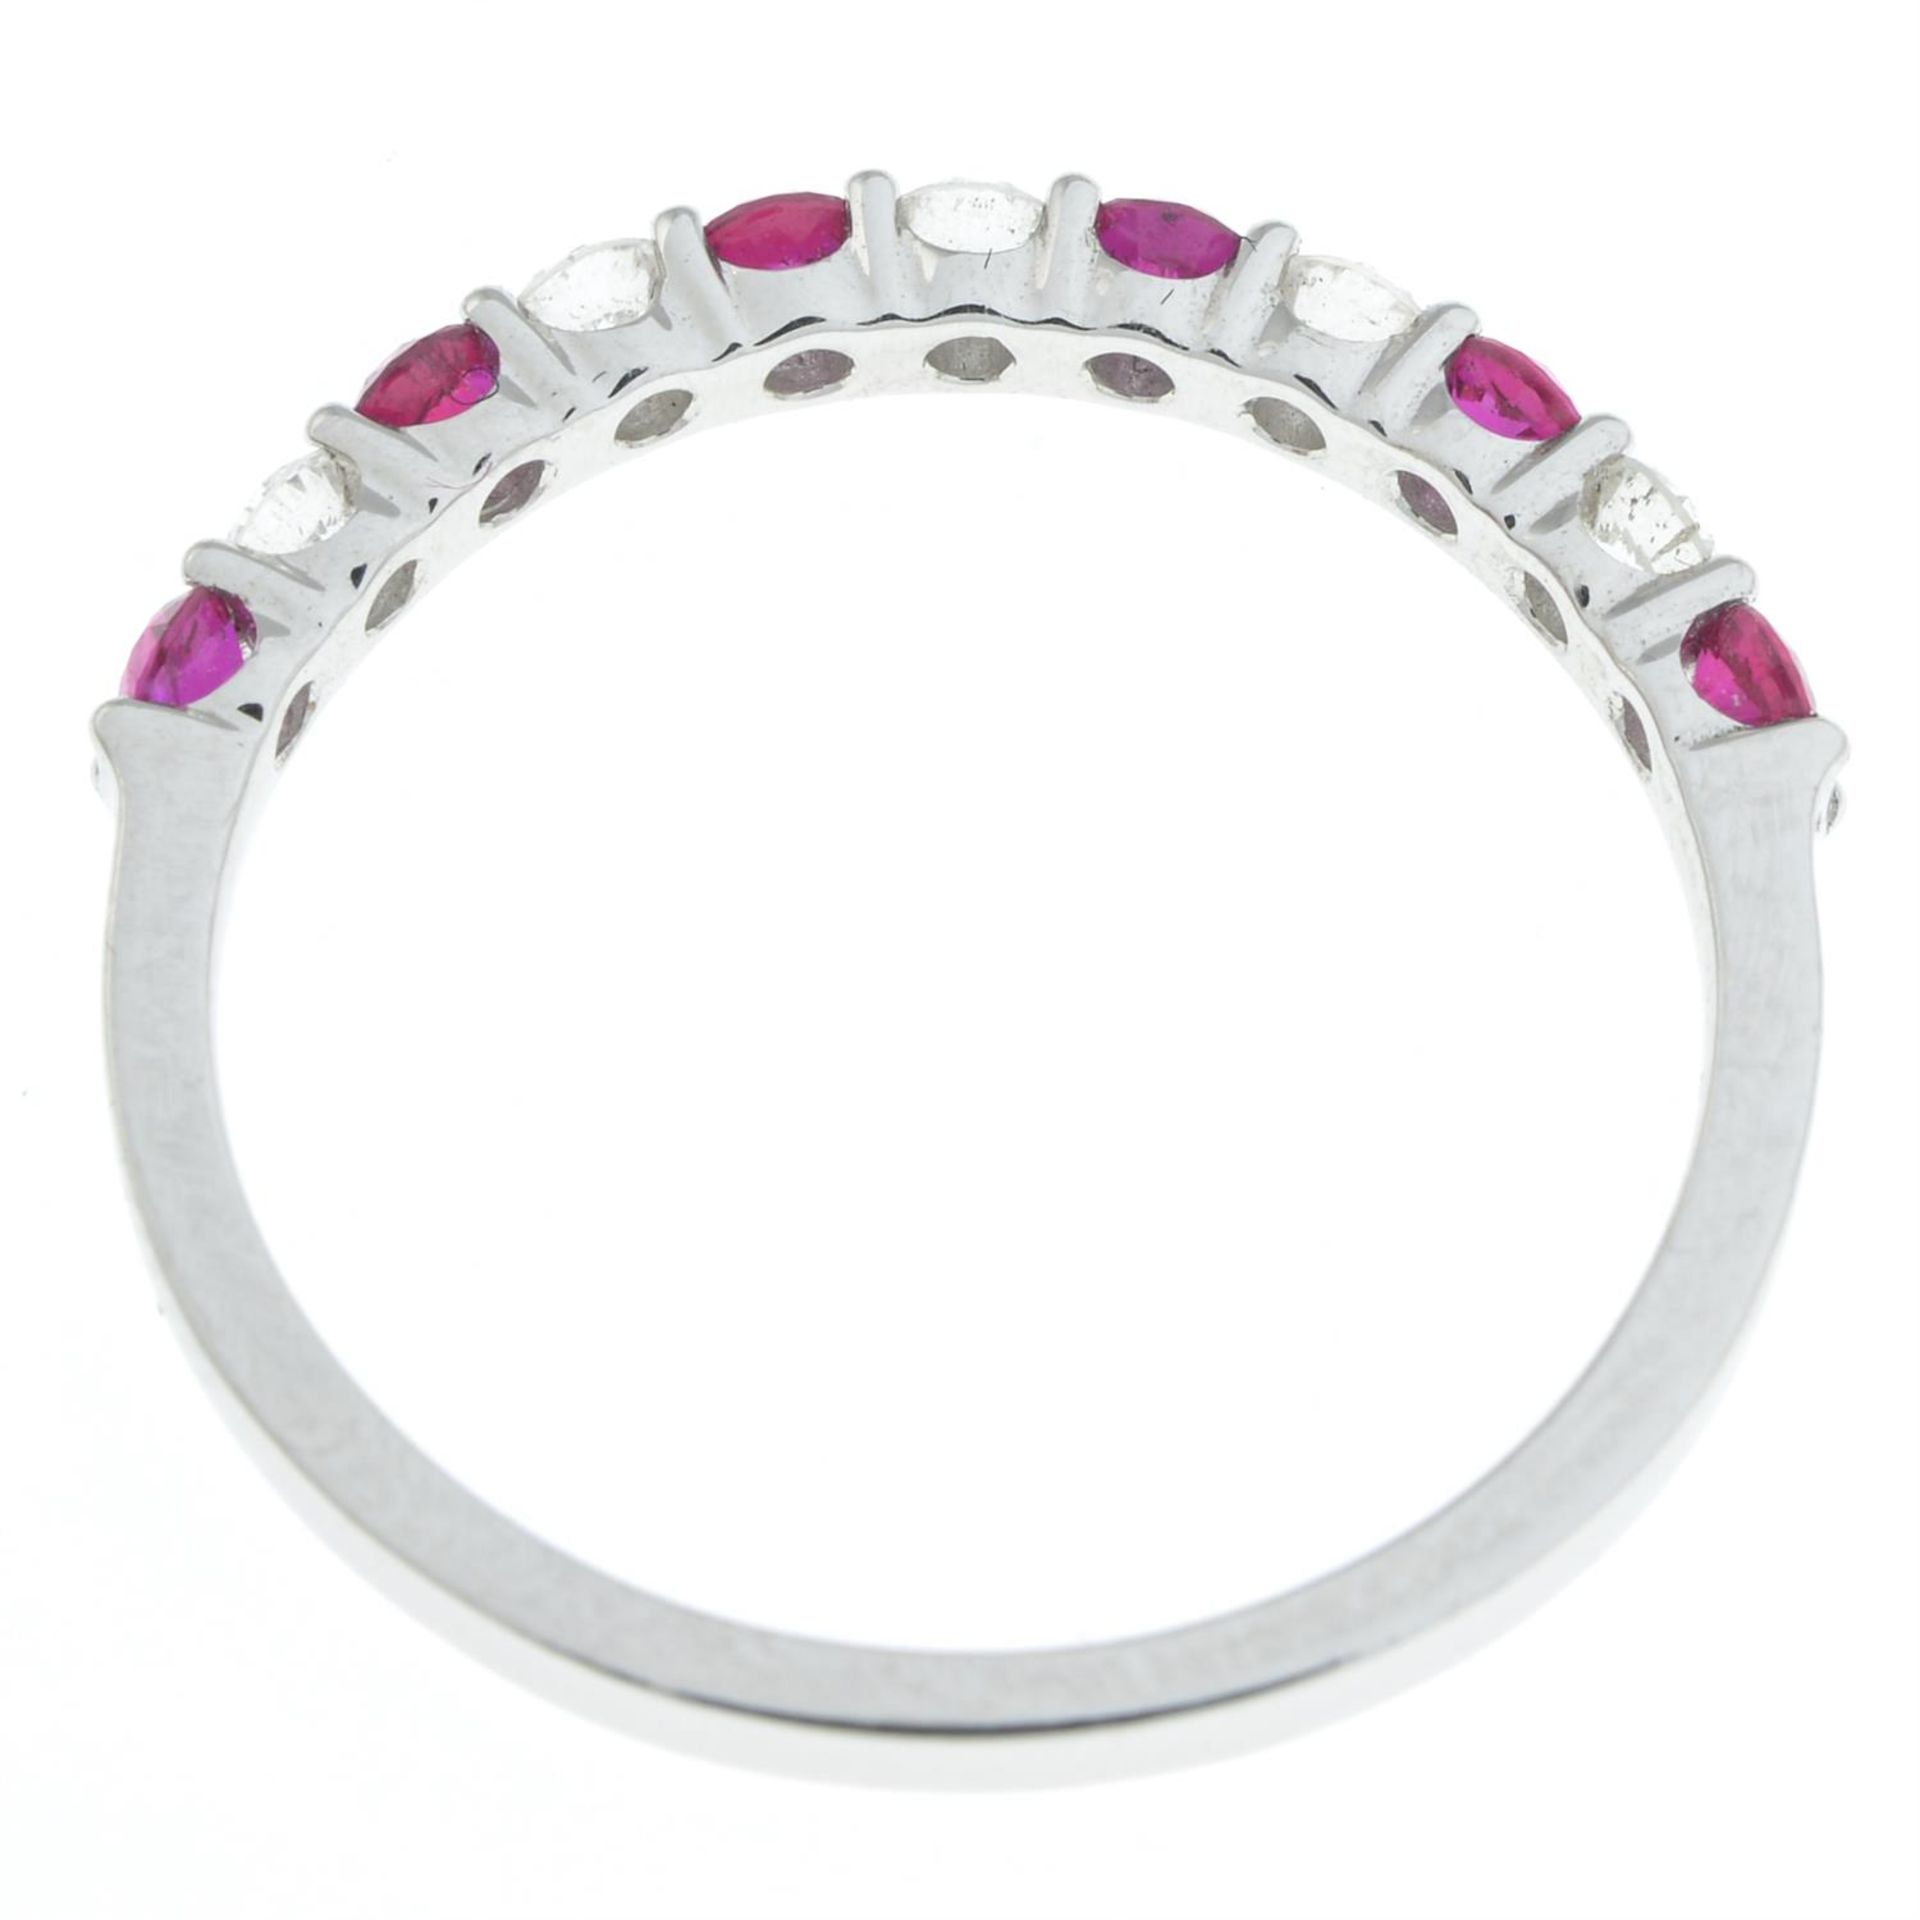 18ct gold ruby & diamond band ring - Image 2 of 2